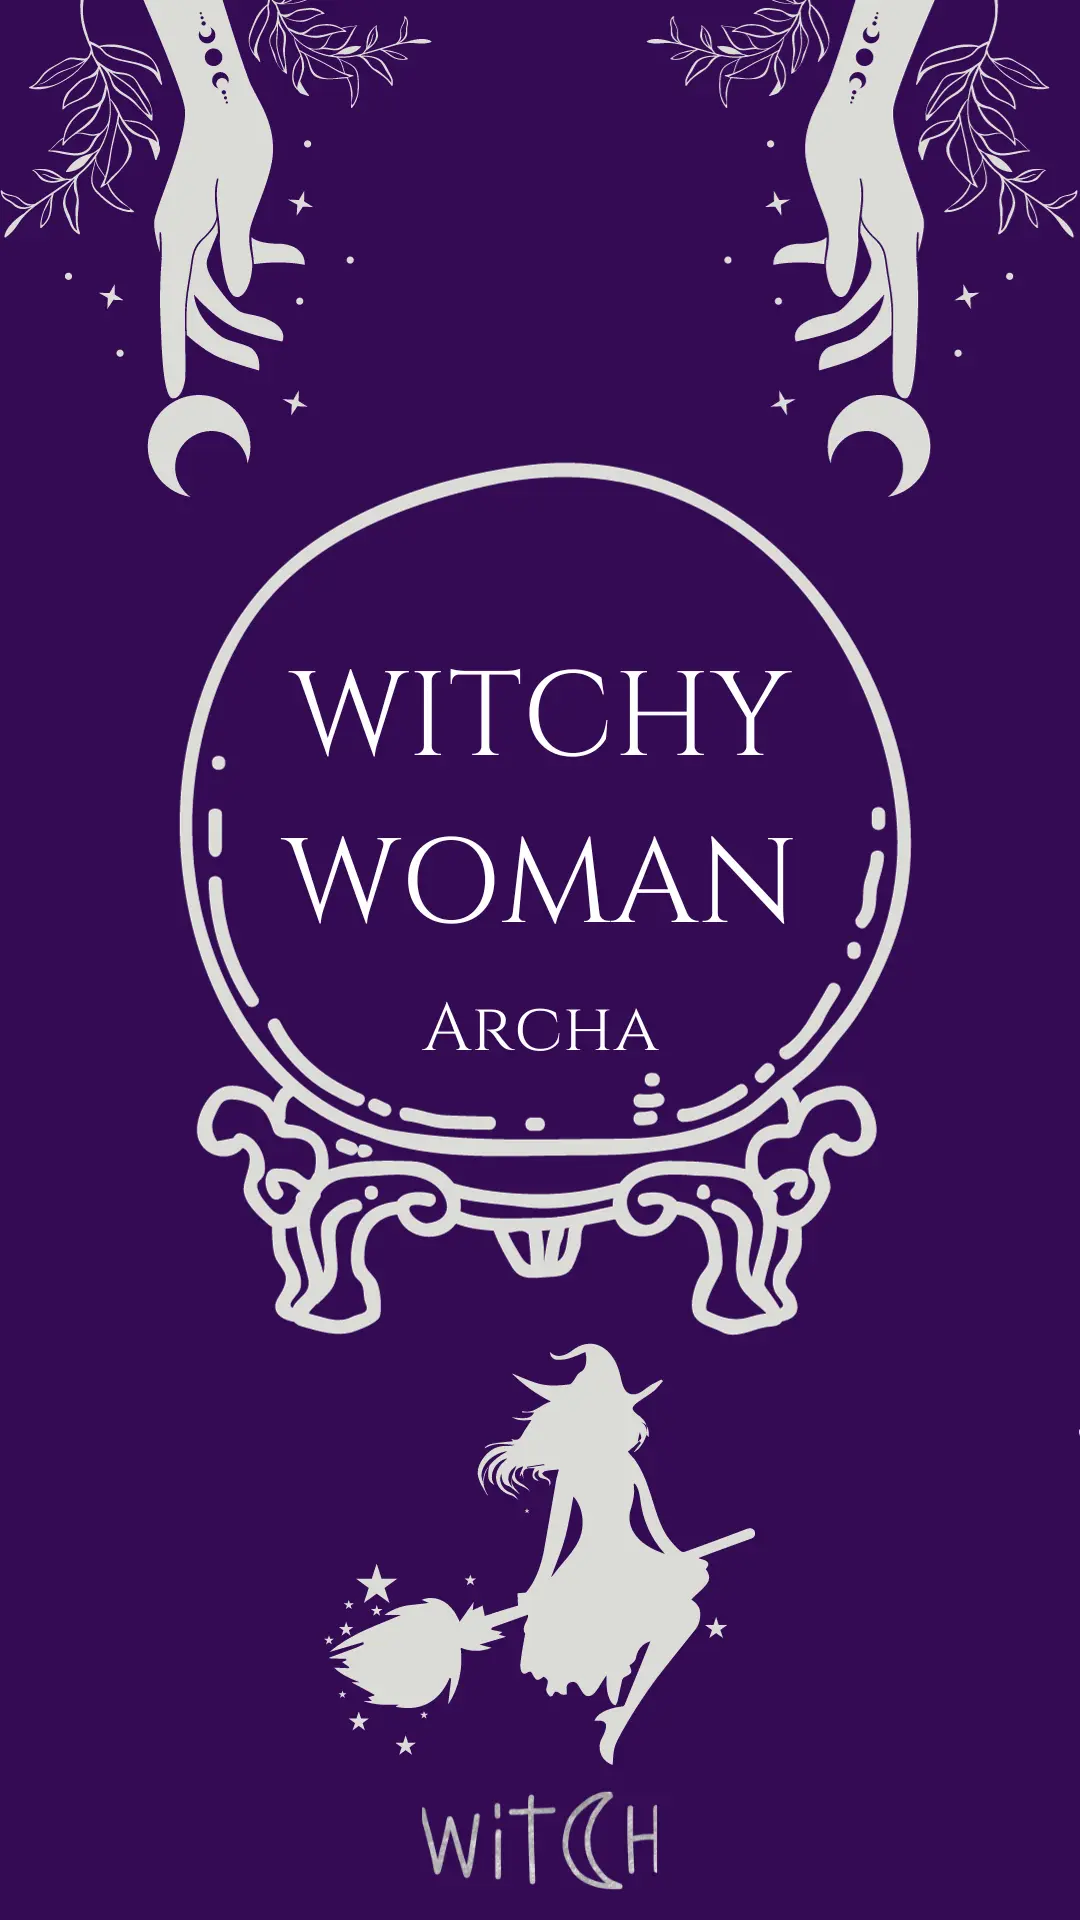 Witchy Woman | Reinvented Version